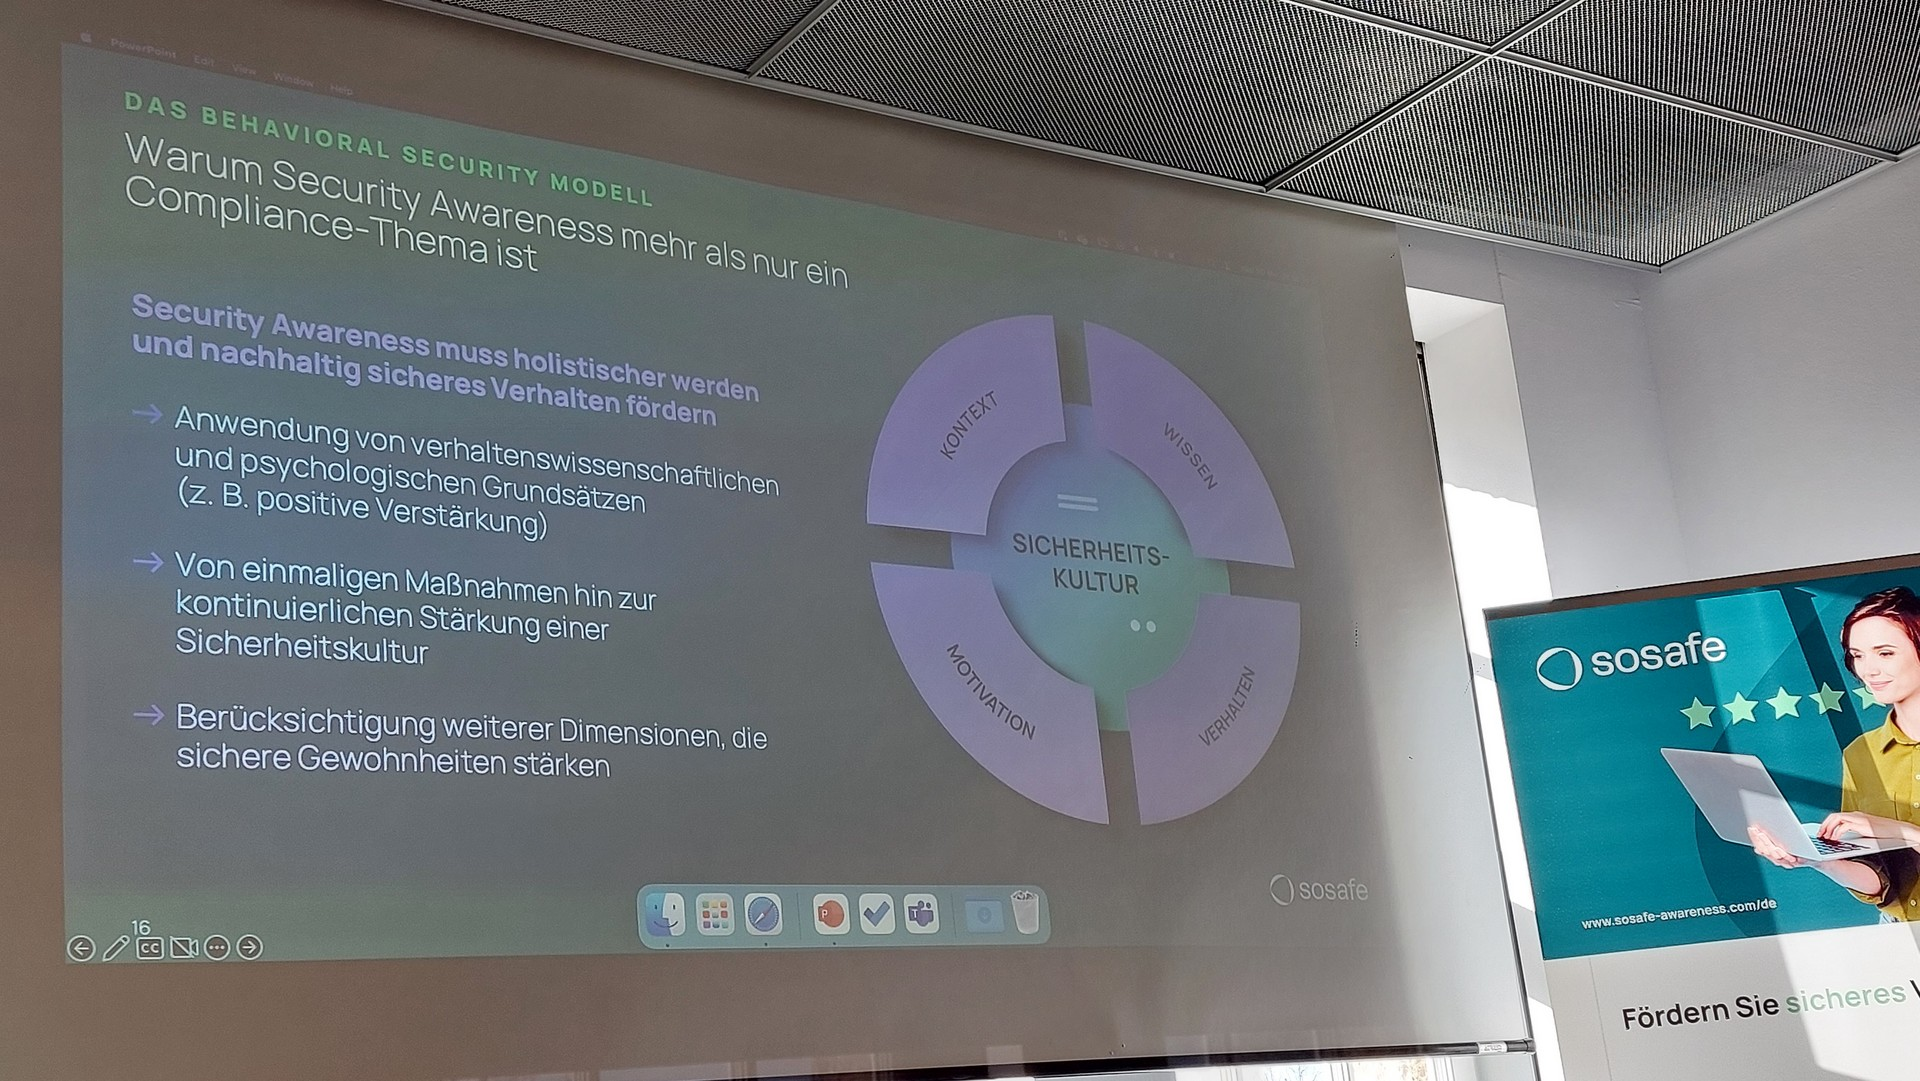 holistic approaches required in security awareness according to Christian Reinhardt in his workshop at SecIT 2023